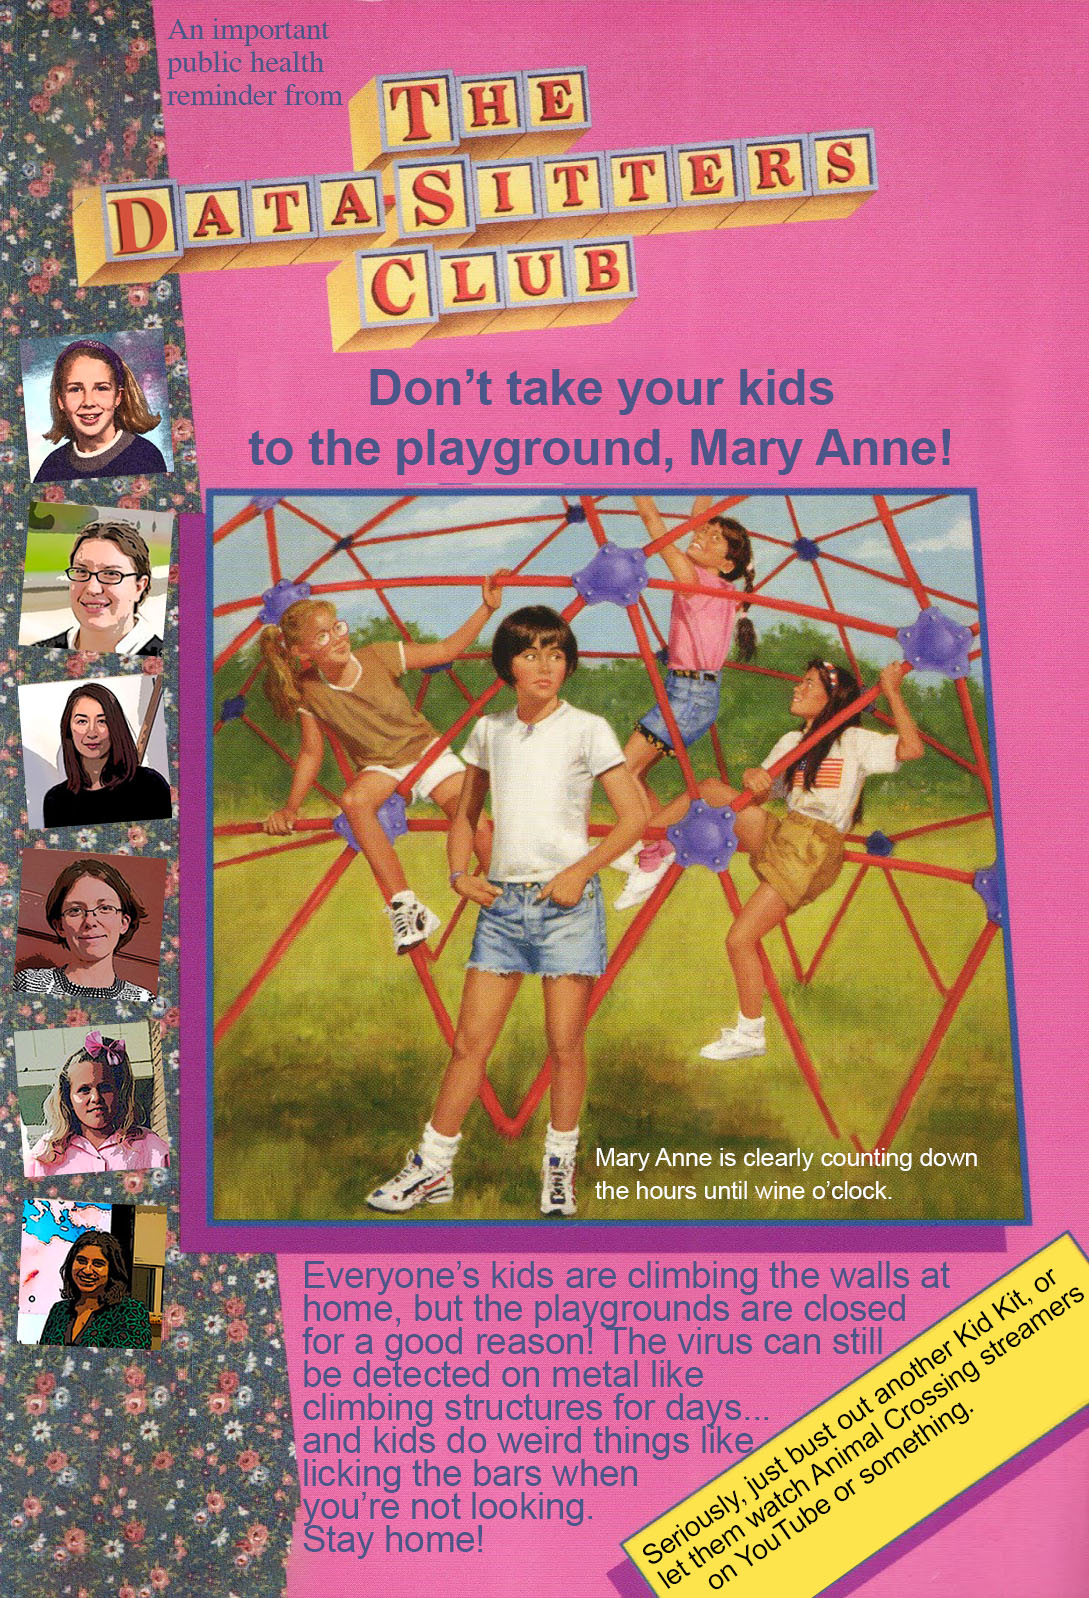 Don't go to the playground, Mary Anne!